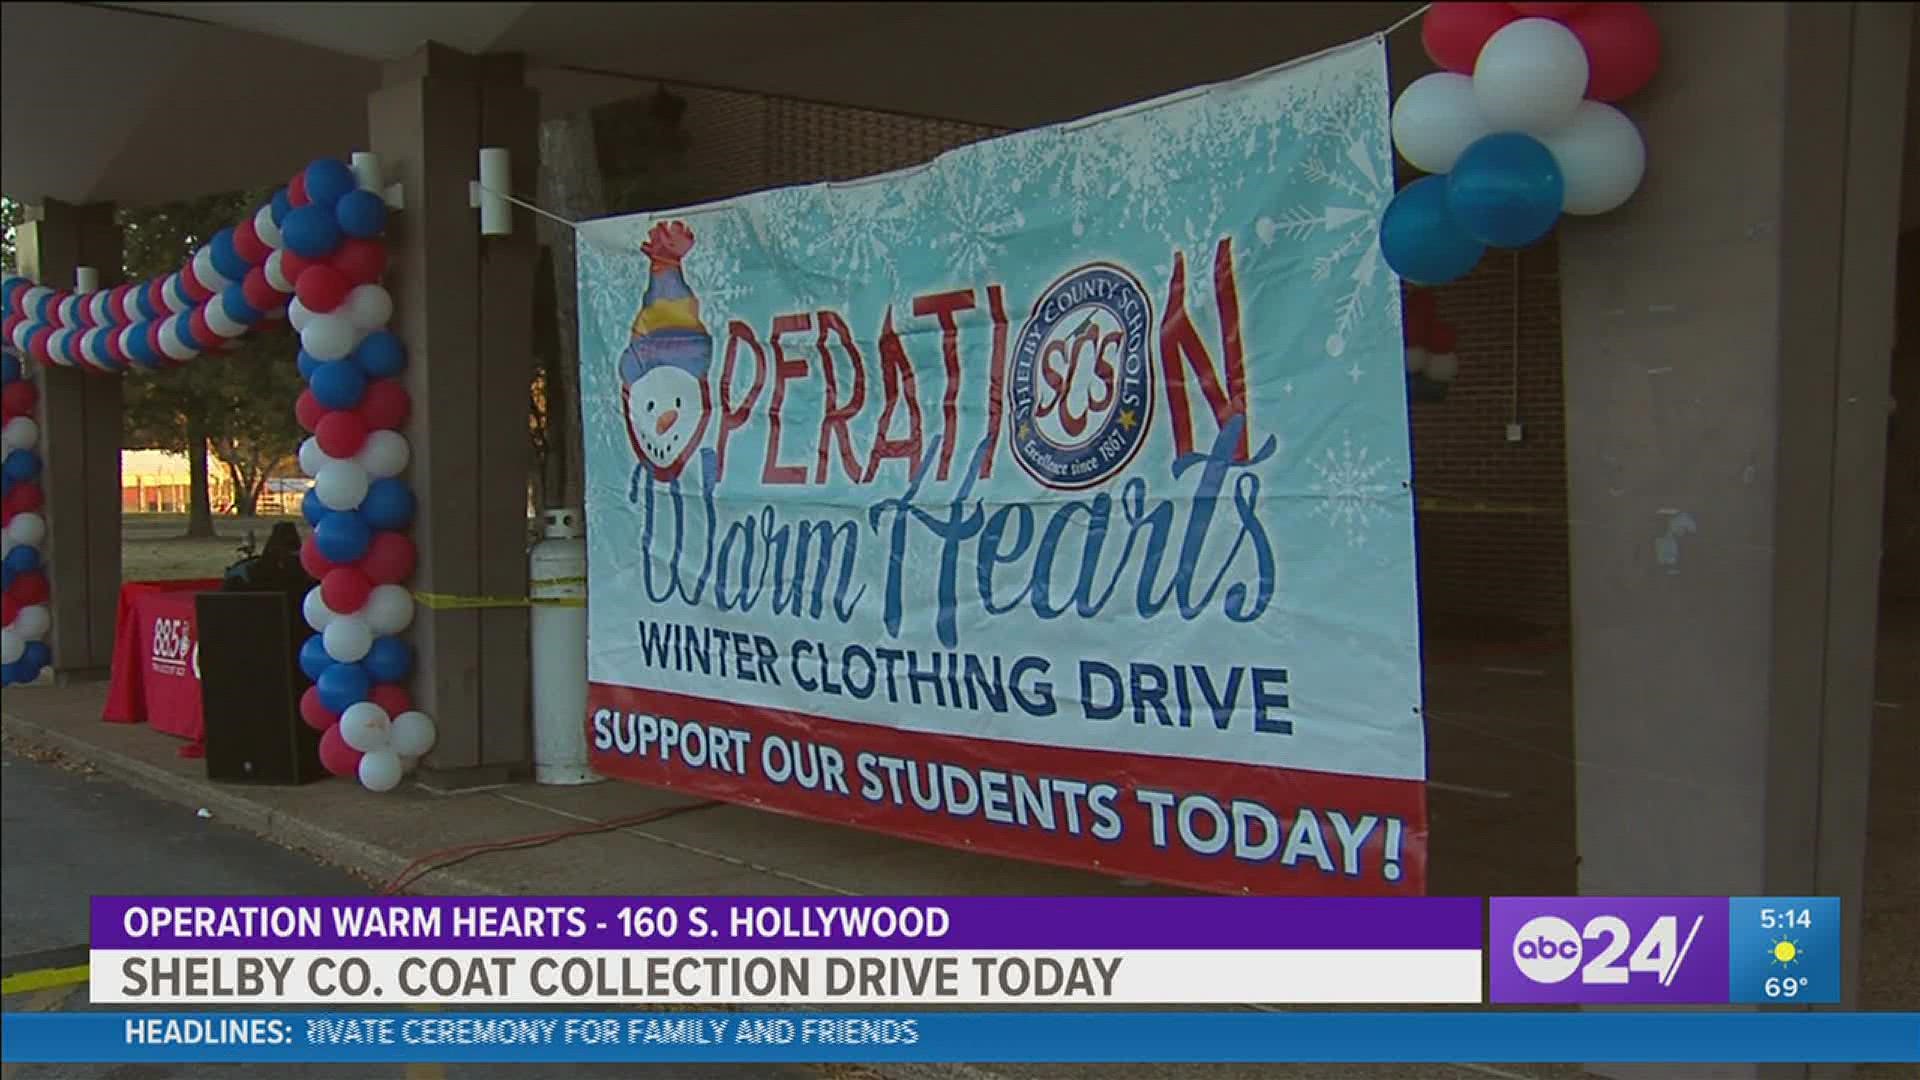 Shelby County Schools is collecting winter clothing during its 7th annual Operation Warm Hearts clothing drive